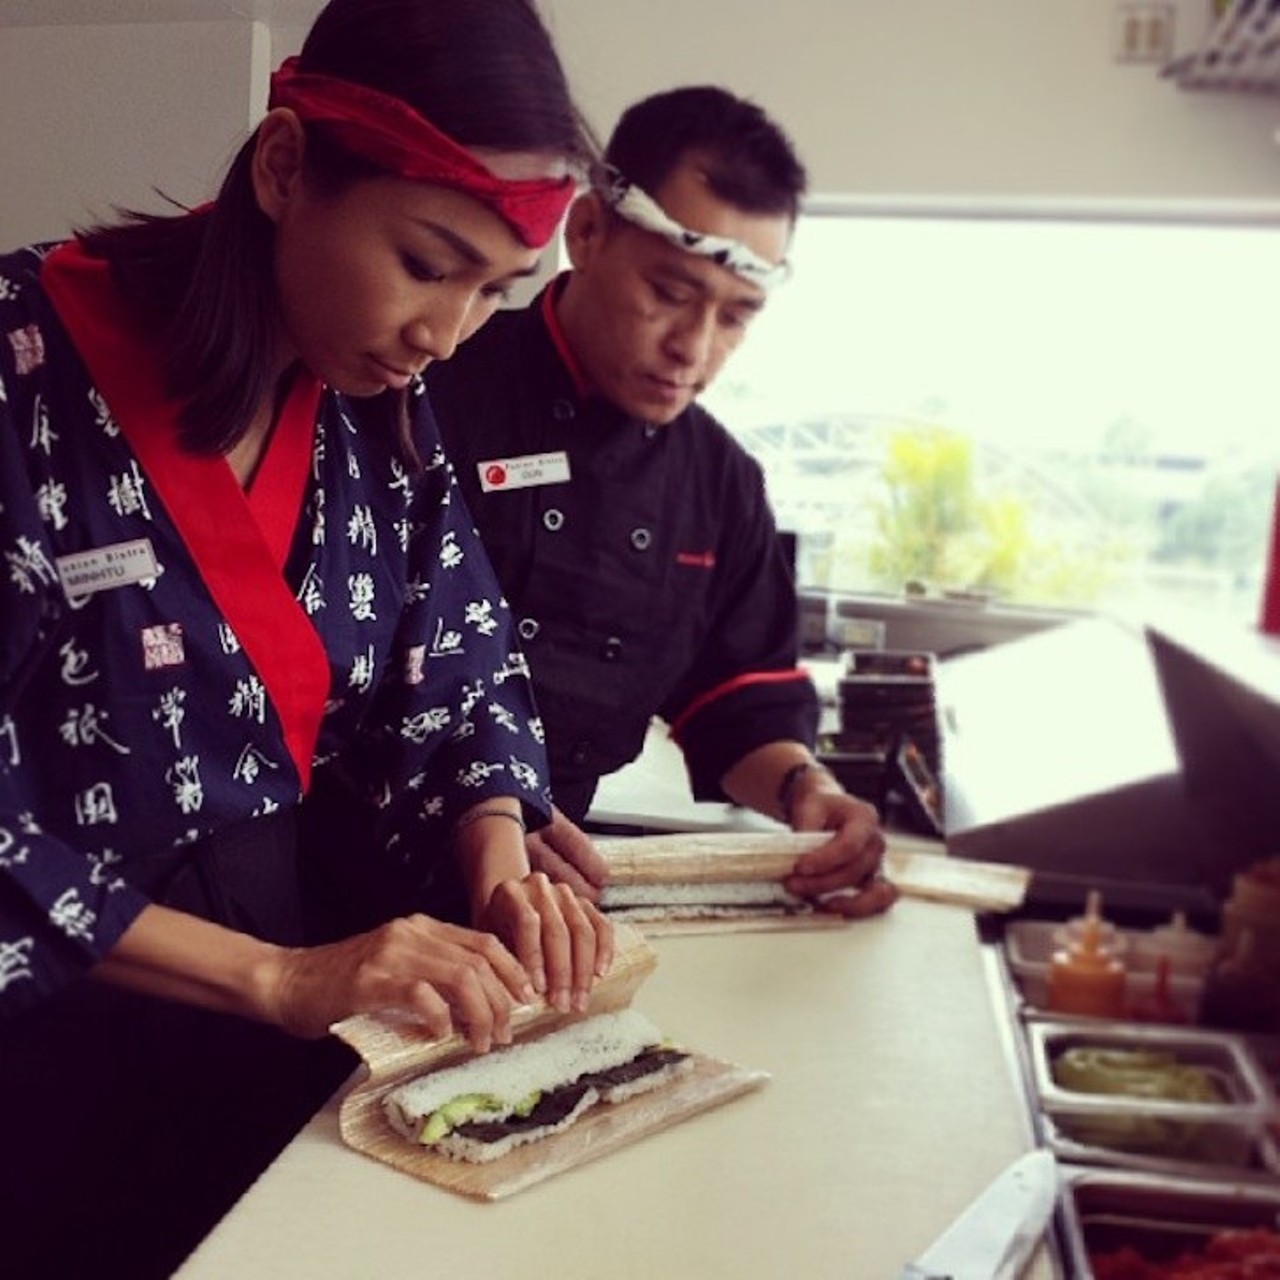 Sushi House
Feb. 13, noon to 3 p.m.; $50
Roll up with your sweetheart this Valentine&#146;s Day weekend. Sushi House is hosting sushi-making classes where you can learn how to prepare rice, cut fish and present a meal properly.
Photo via minhtuvan/Instagram